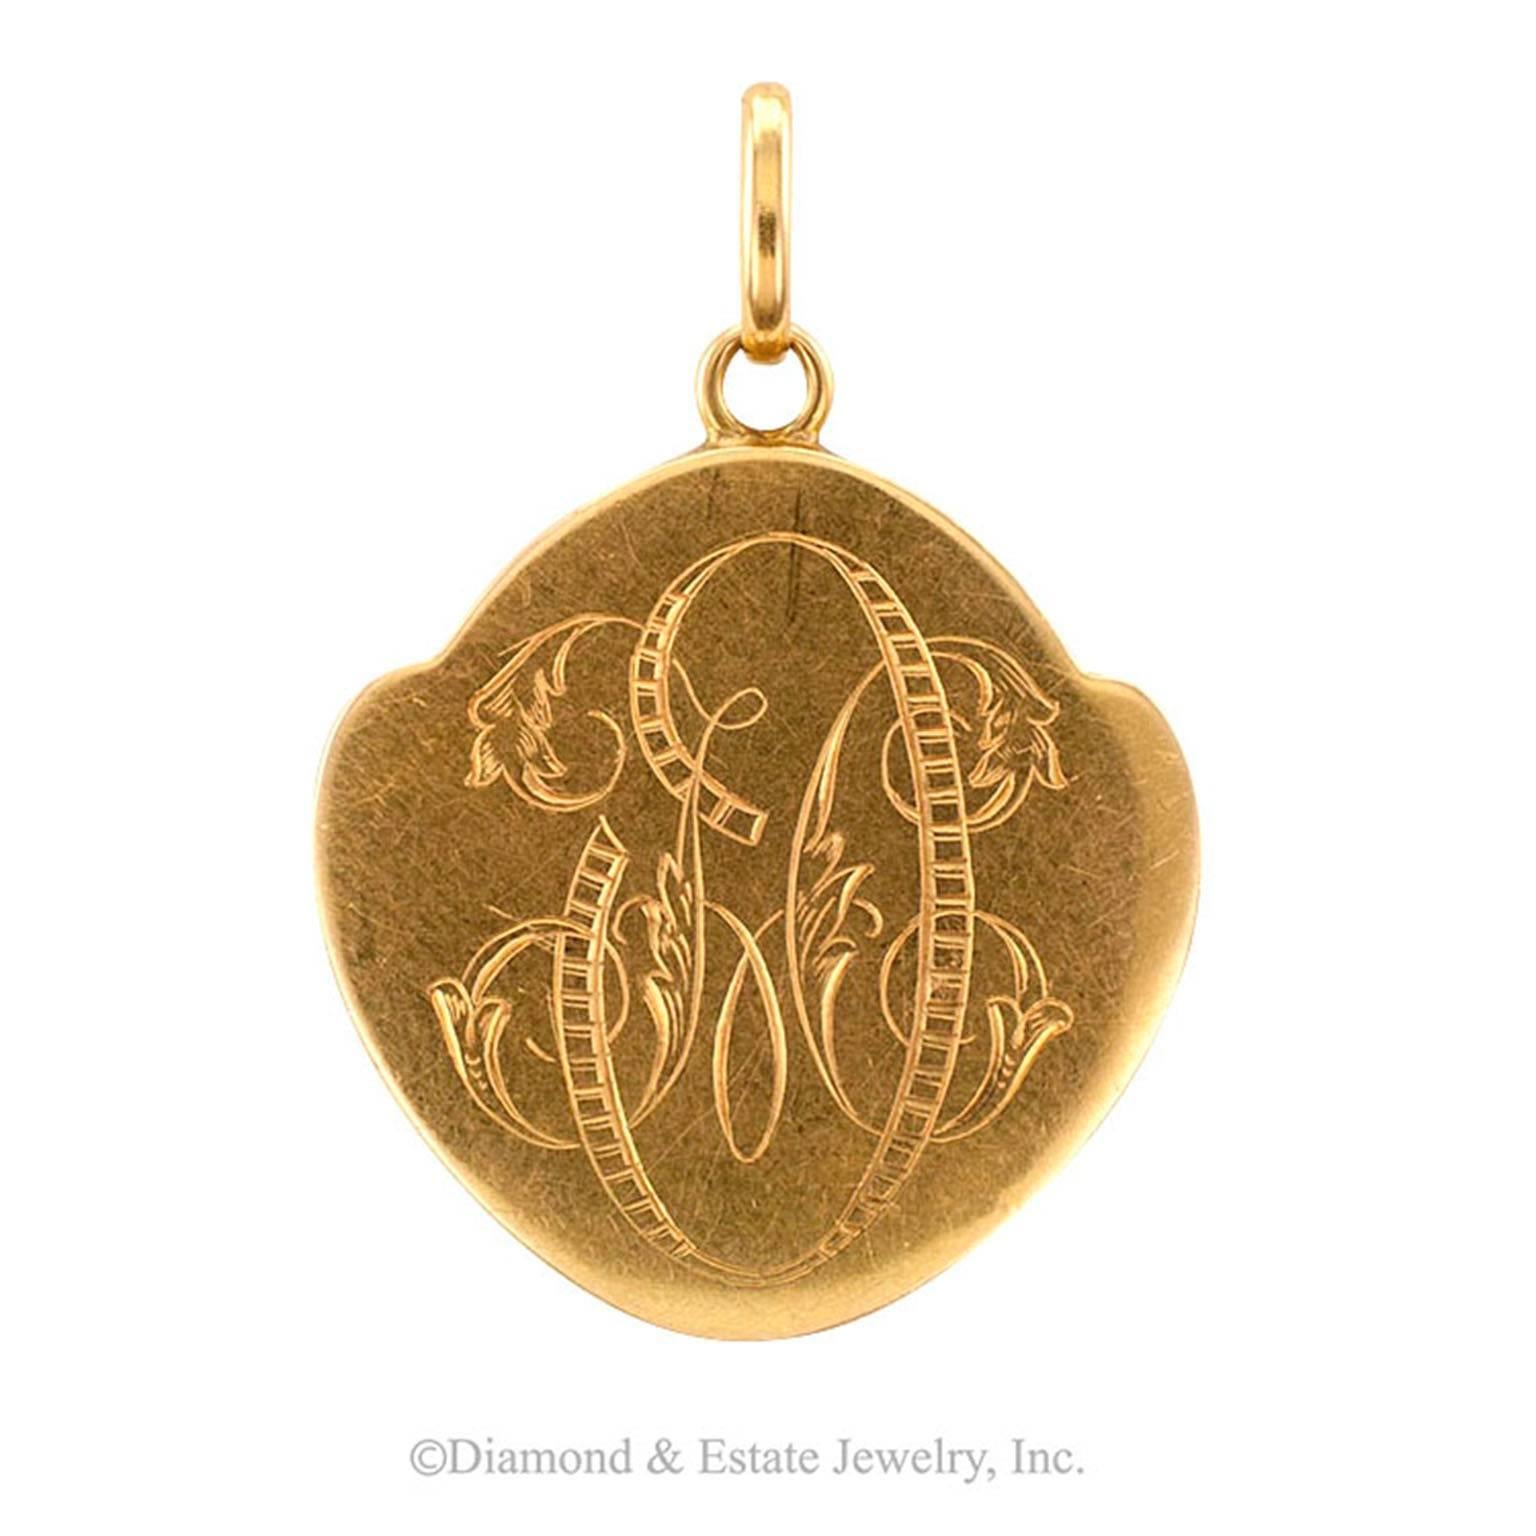 Art Nouveau Gold and Diamond In Relief Locket

At the turn of the century, images of the ideal woman were the antithesis of their Victorian counterparts.  She was more liberated, more progressive in every sense of the word.  The lovely in relief